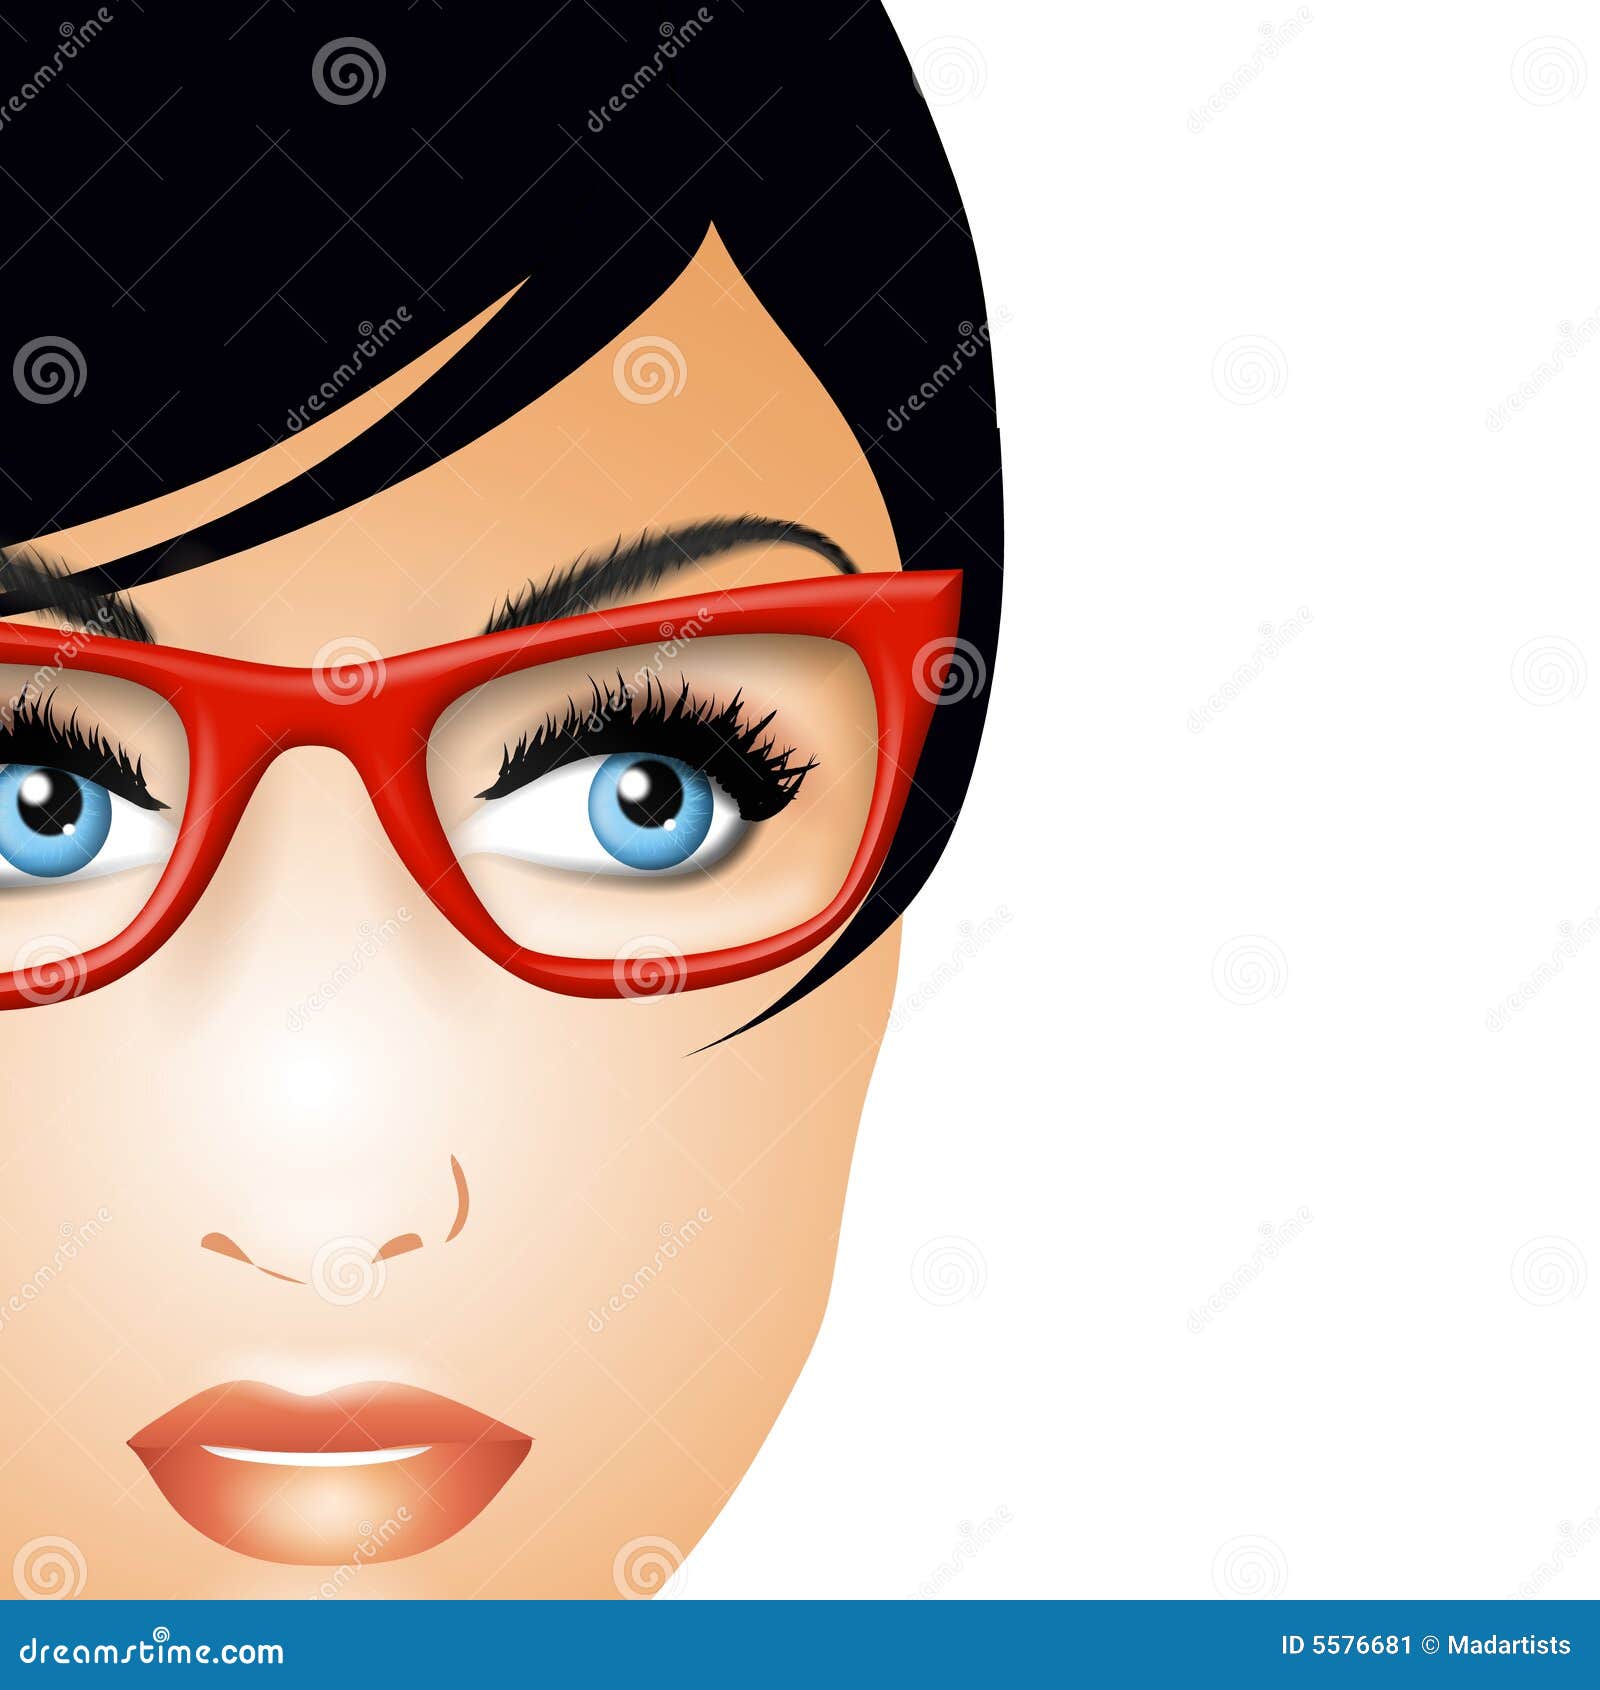 clipart girl with glasses - photo #20